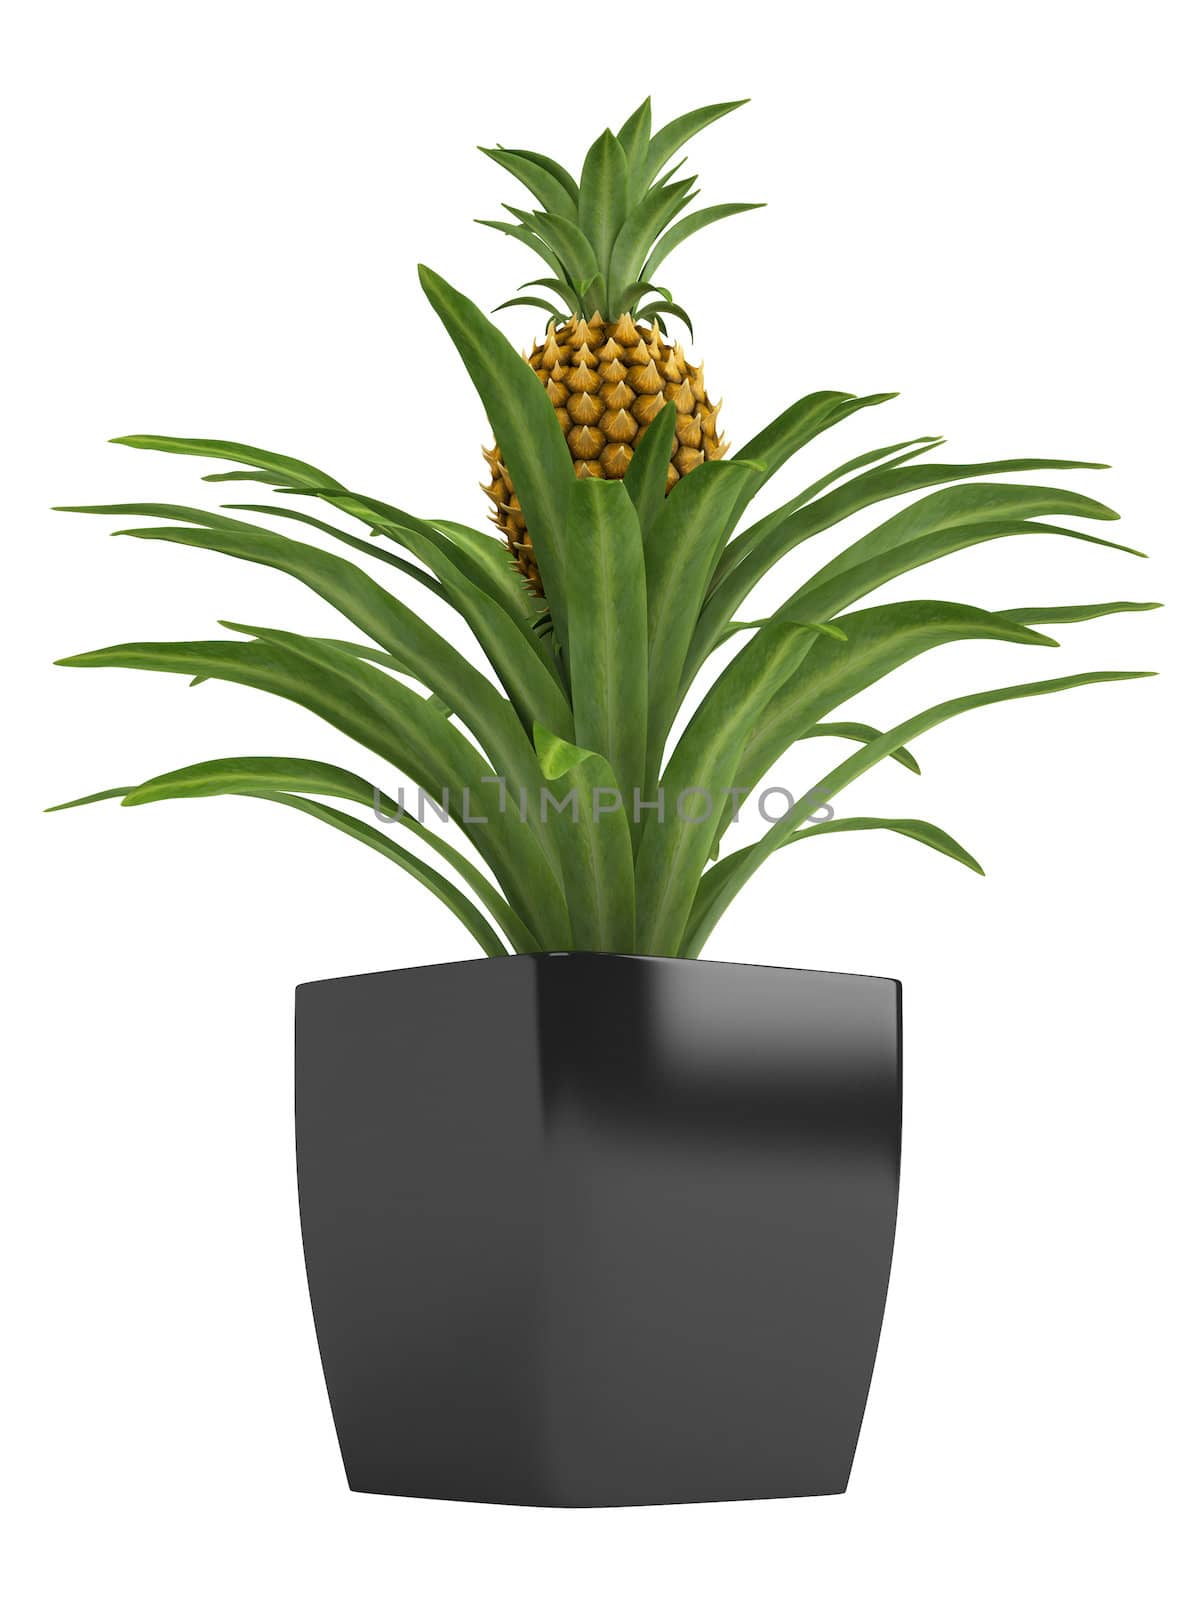 Fruiting pineapple plant by AlexanderMorozov